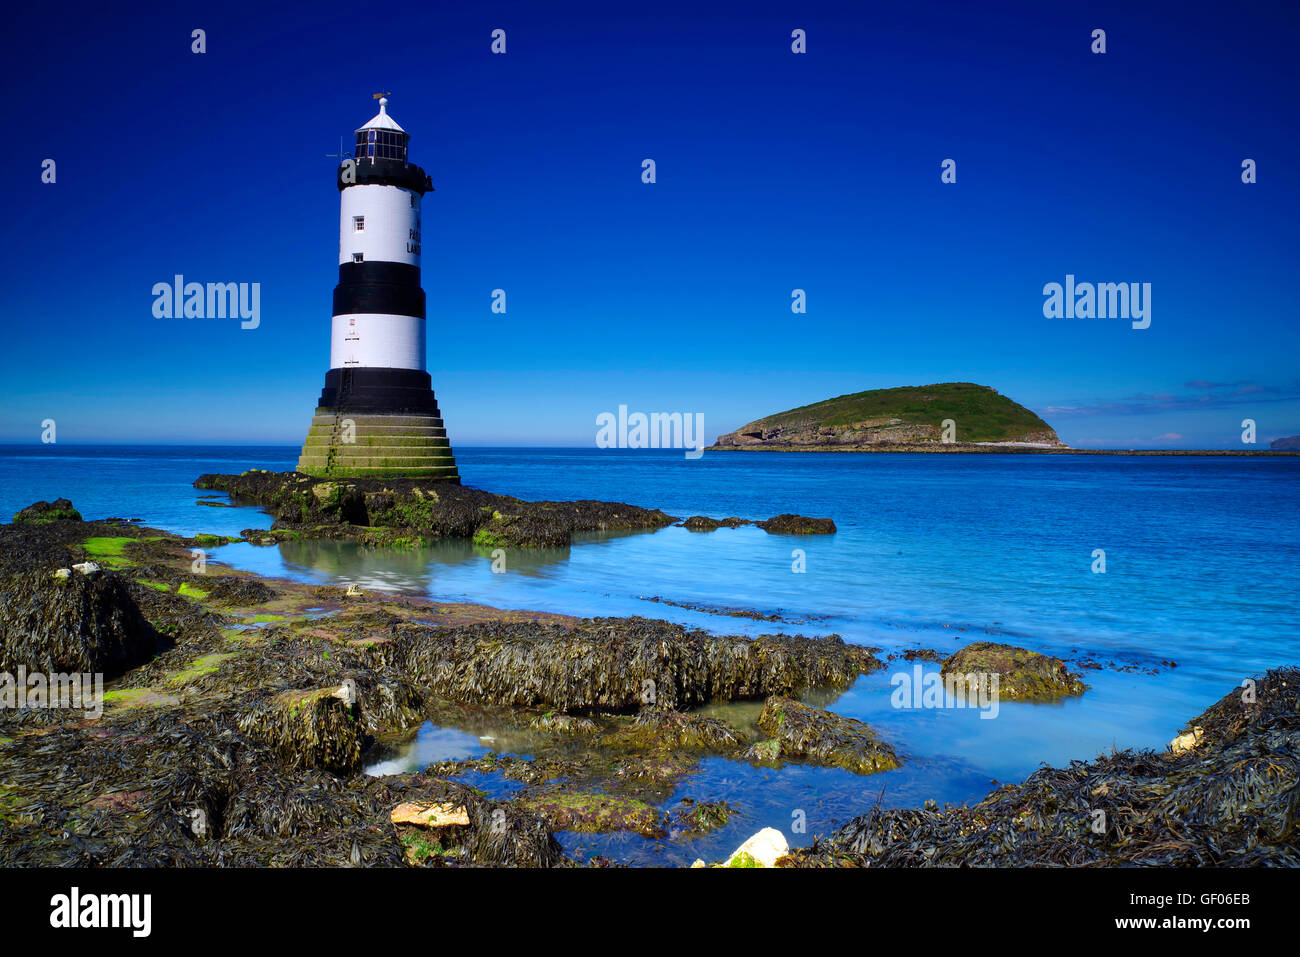 Phare de Penmon, Llanfaes, Anglesey, Banque D'Images